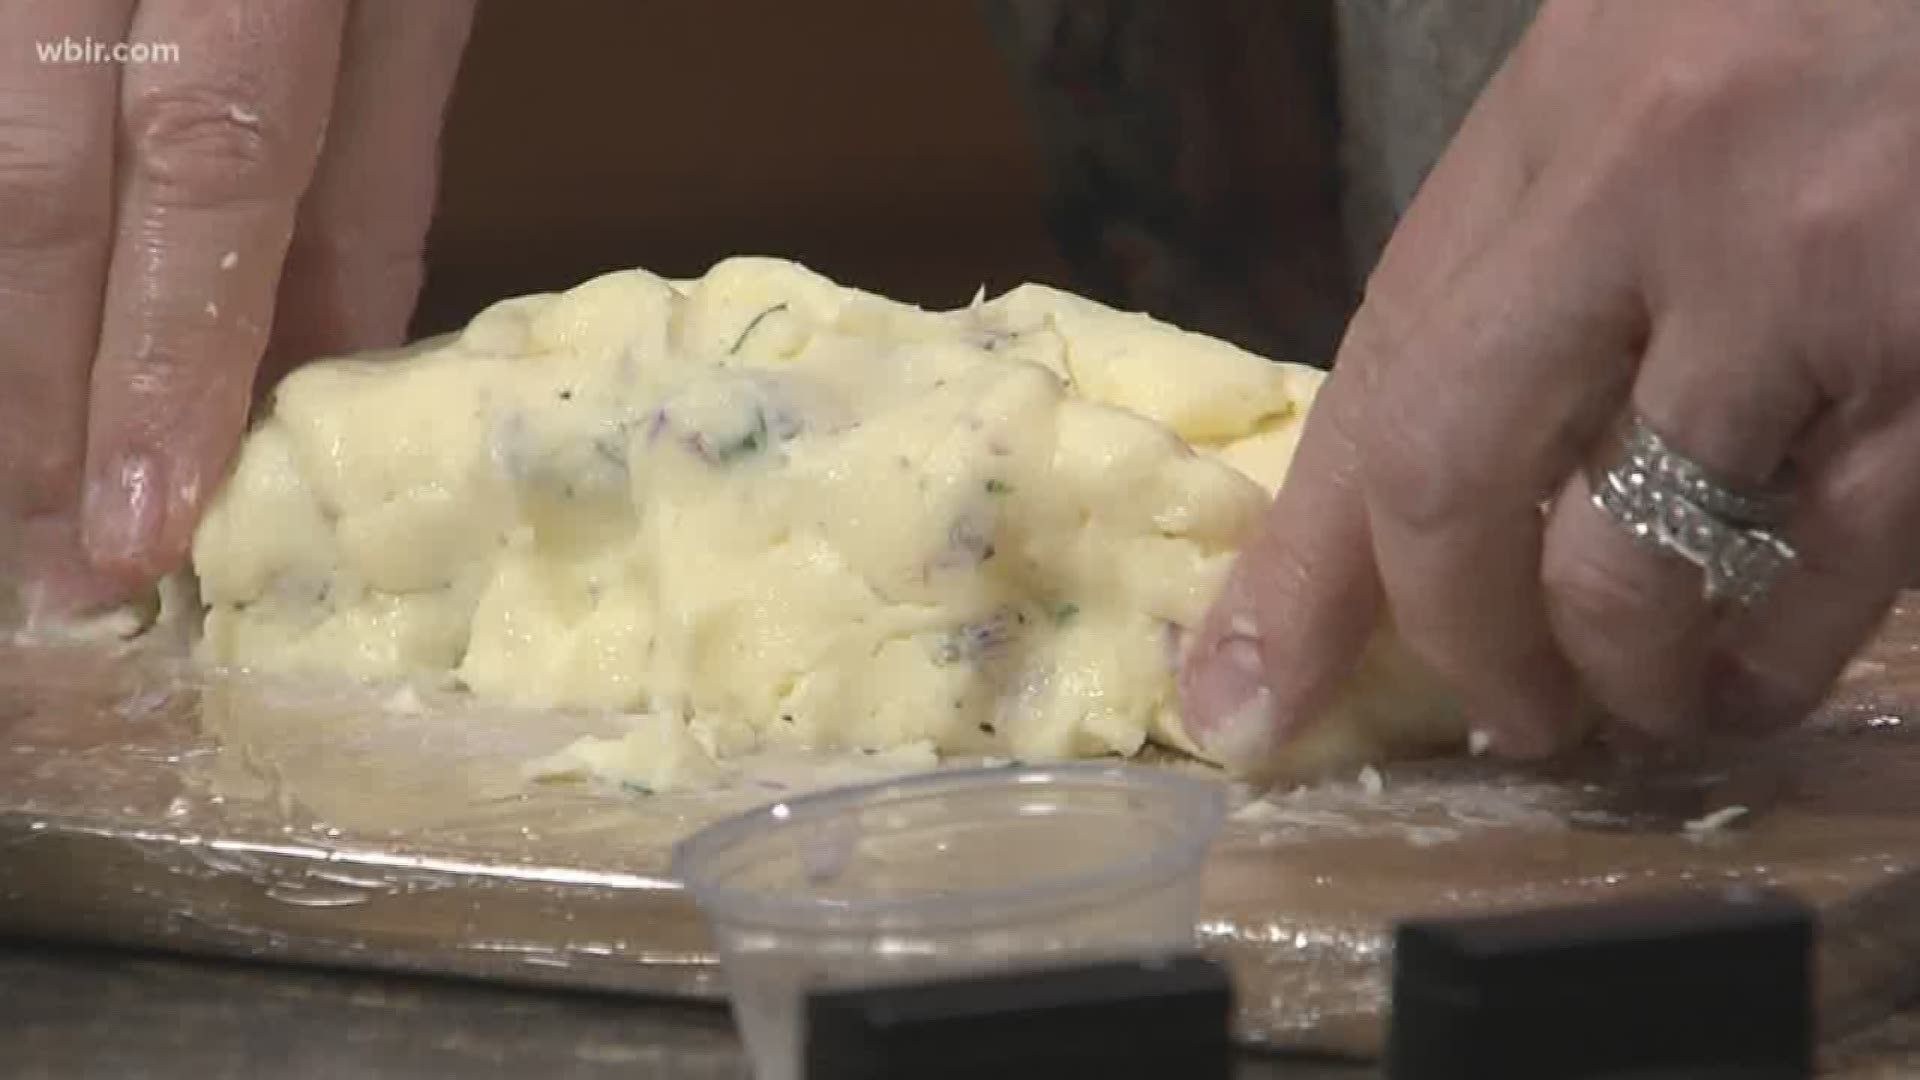 Kim Wilcox from It's all So Yummy Cafe whips up some delicious homemade butter (and it's not difficult at all to make!)